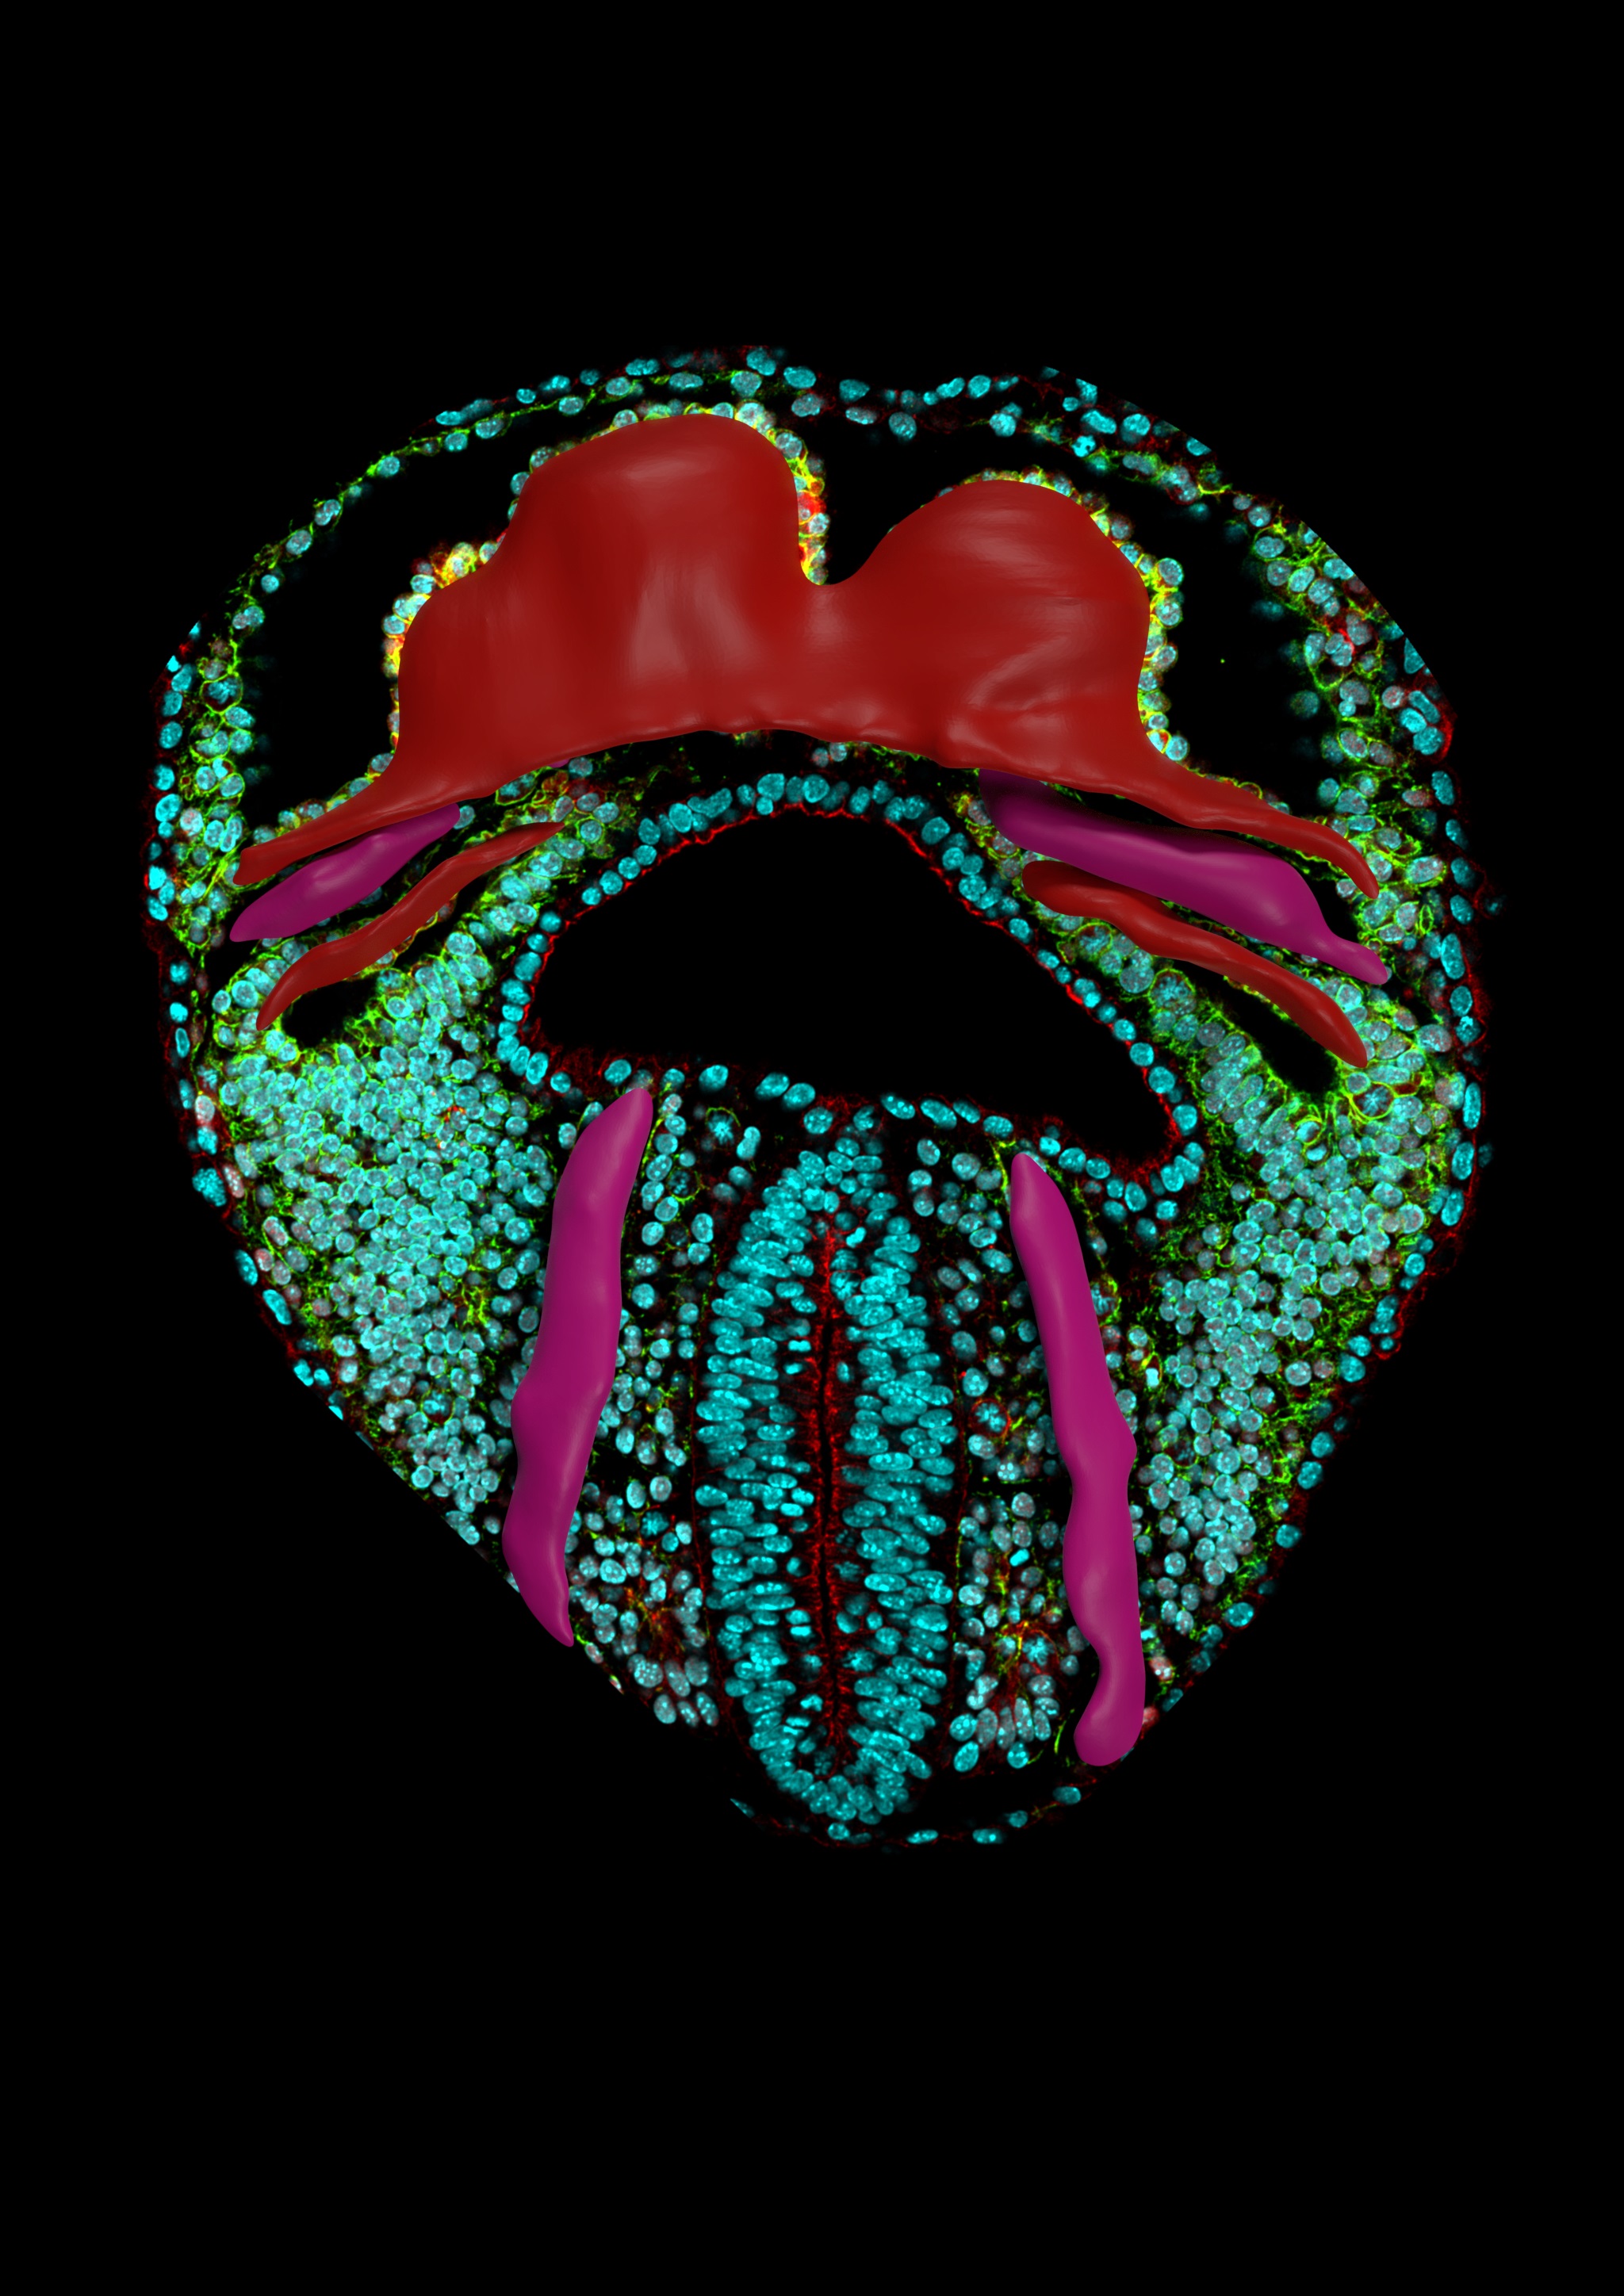 An optical section from a ventral view of a mouse embryo at embryonic day E8.0. The section is overlain with a cast of the three-dimensional shape of the forming heart (red) and the incipient circulatory system (purple).